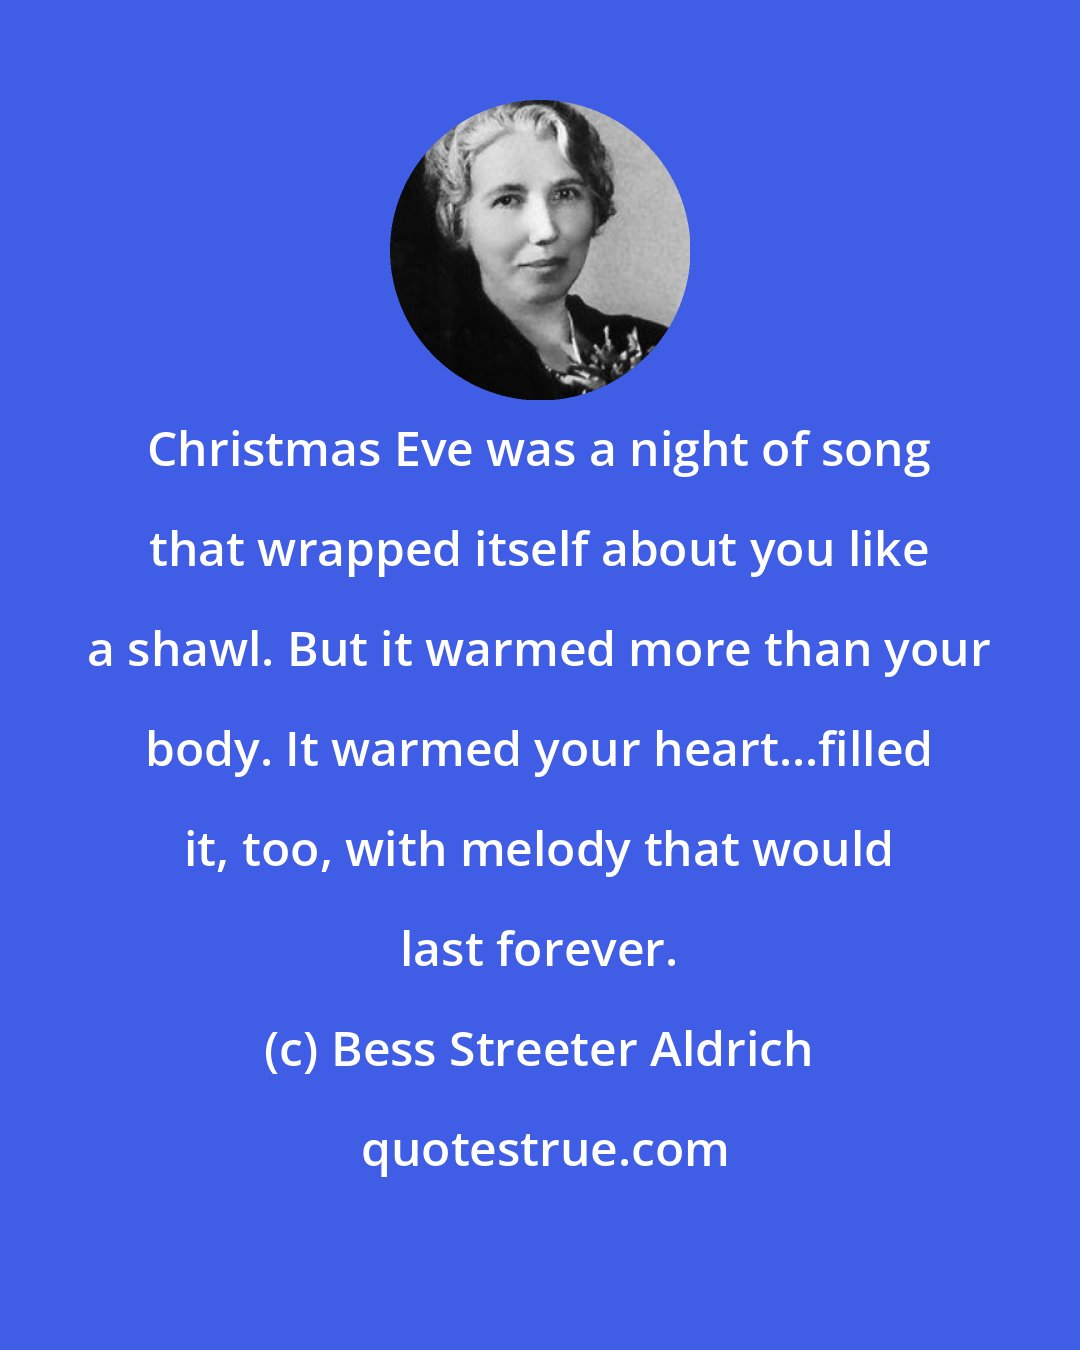 Bess Streeter Aldrich: Christmas Eve was a night of song that wrapped itself about you like a shawl. But it warmed more than your body. It warmed your heart...filled it, too, with melody that would last forever.